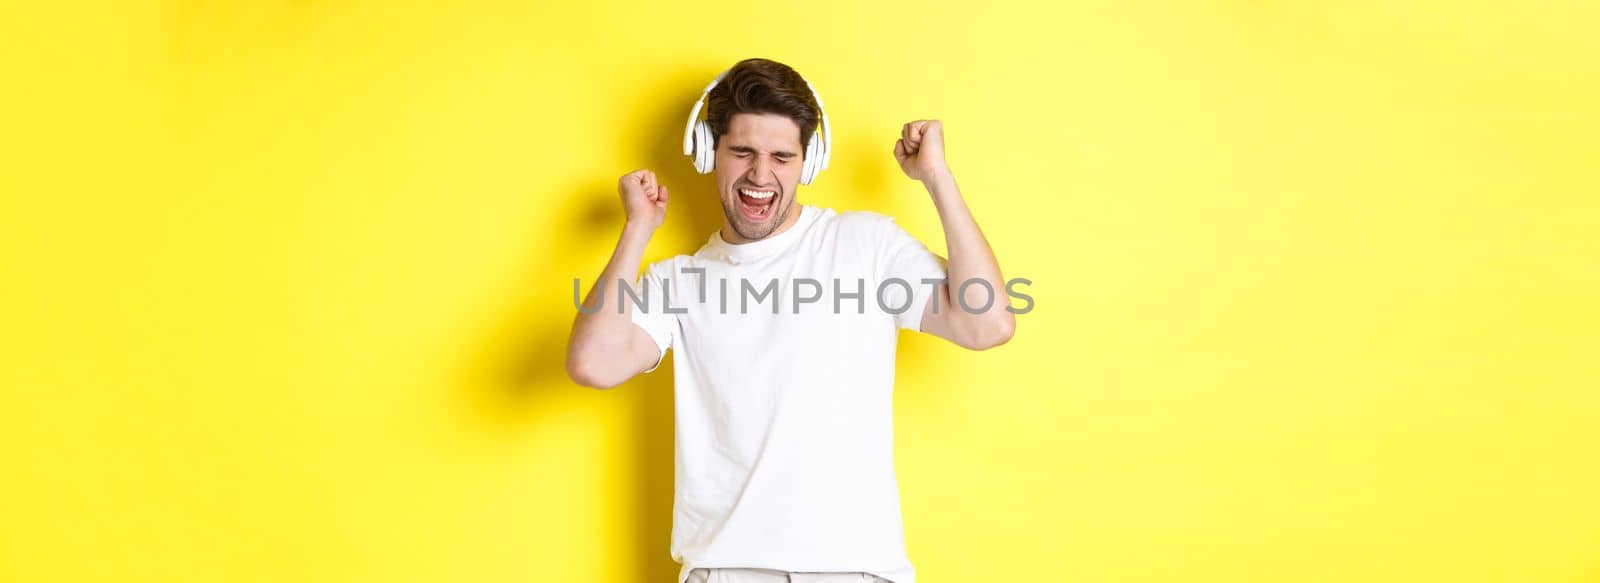 Happy man dancing and listening music in white headphones, standing over yellow background. Copy space